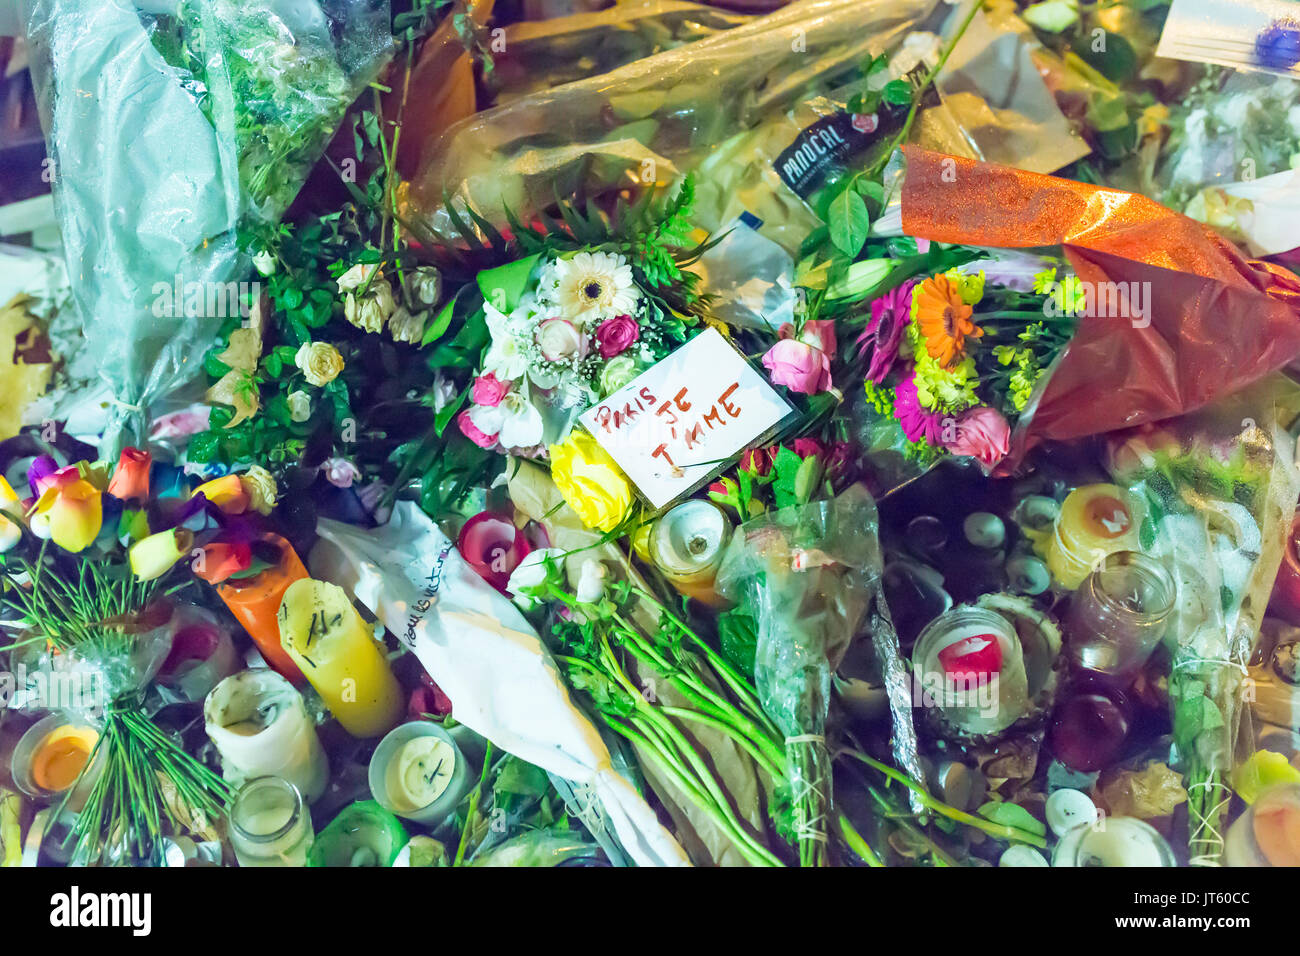 Paris je t'aime, Paris i love you among flowers and candles. Homage at the victims of the terrorist attacks in Paris the 13th of november 2015. Stock Photo